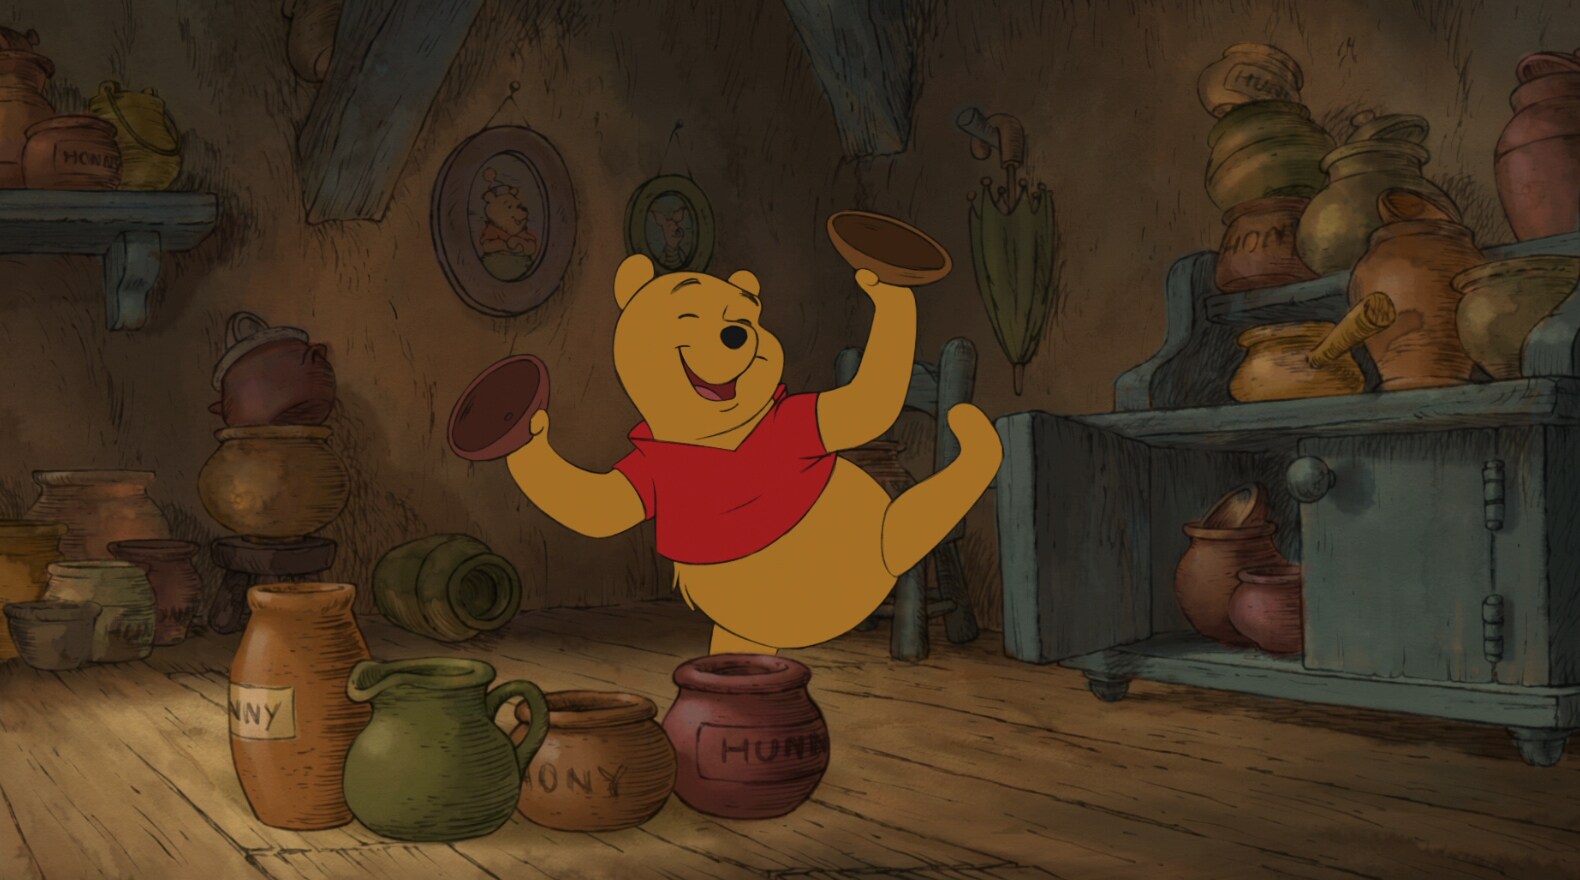 “Willy, nilly, silly, old Bear!”